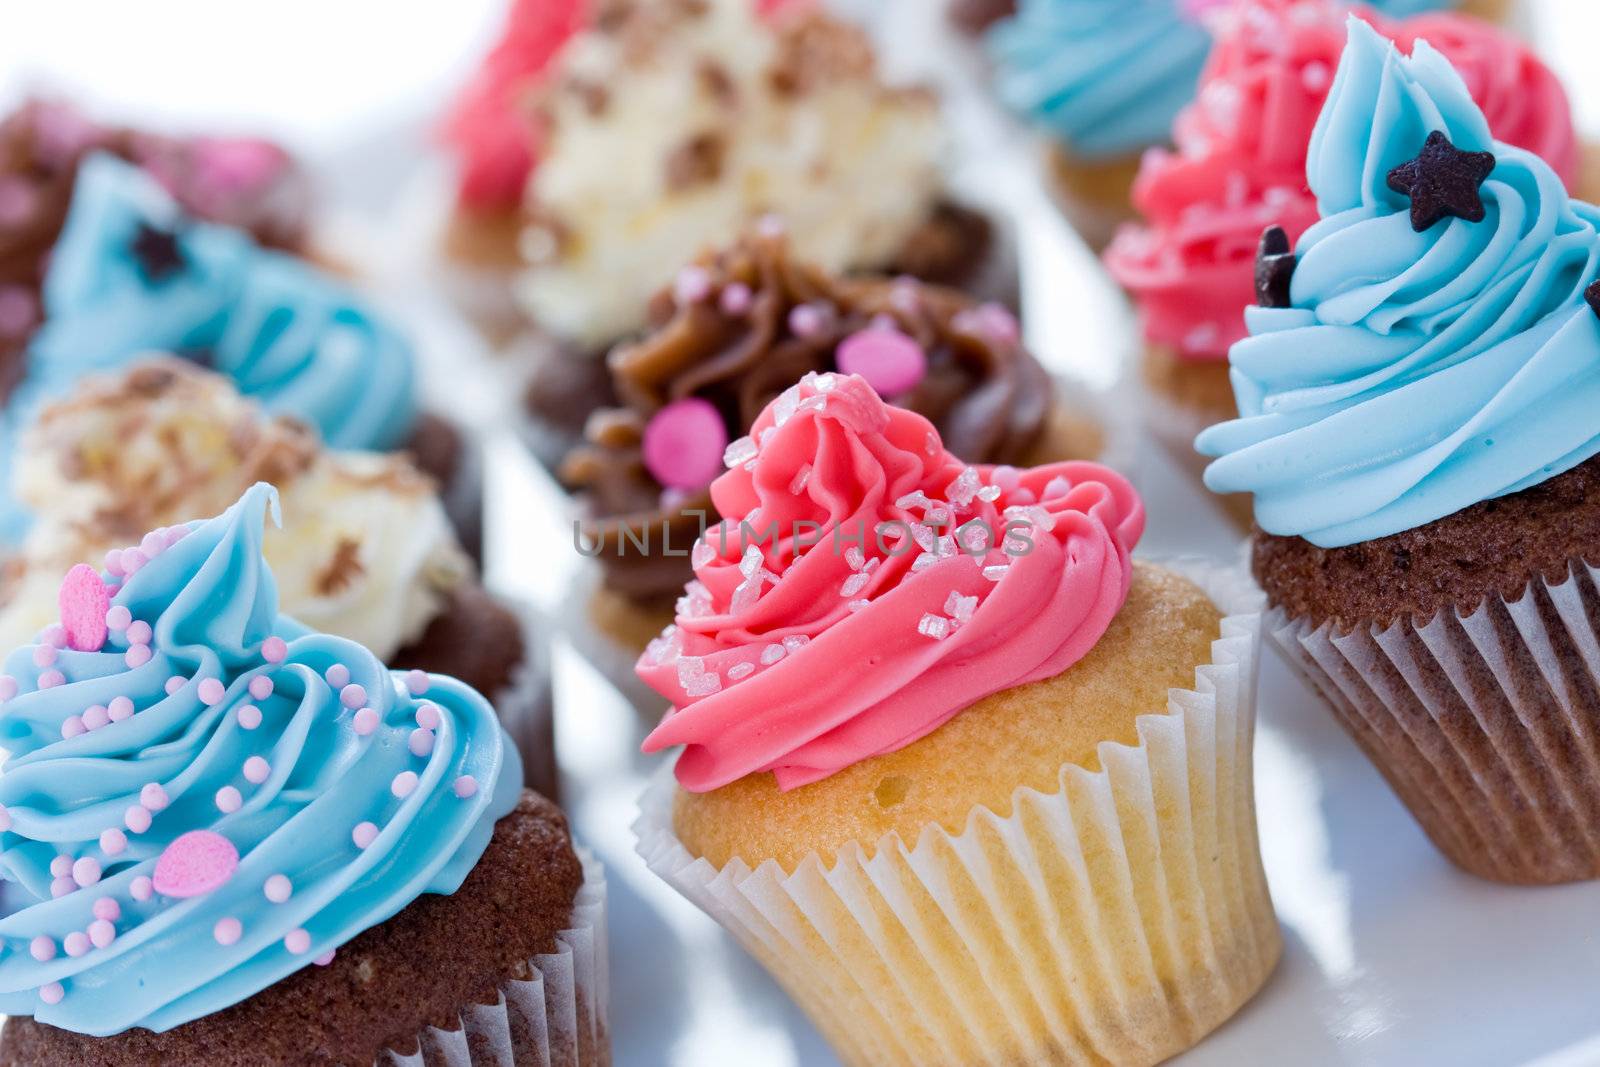 Assortment of brightly colored cupcakes